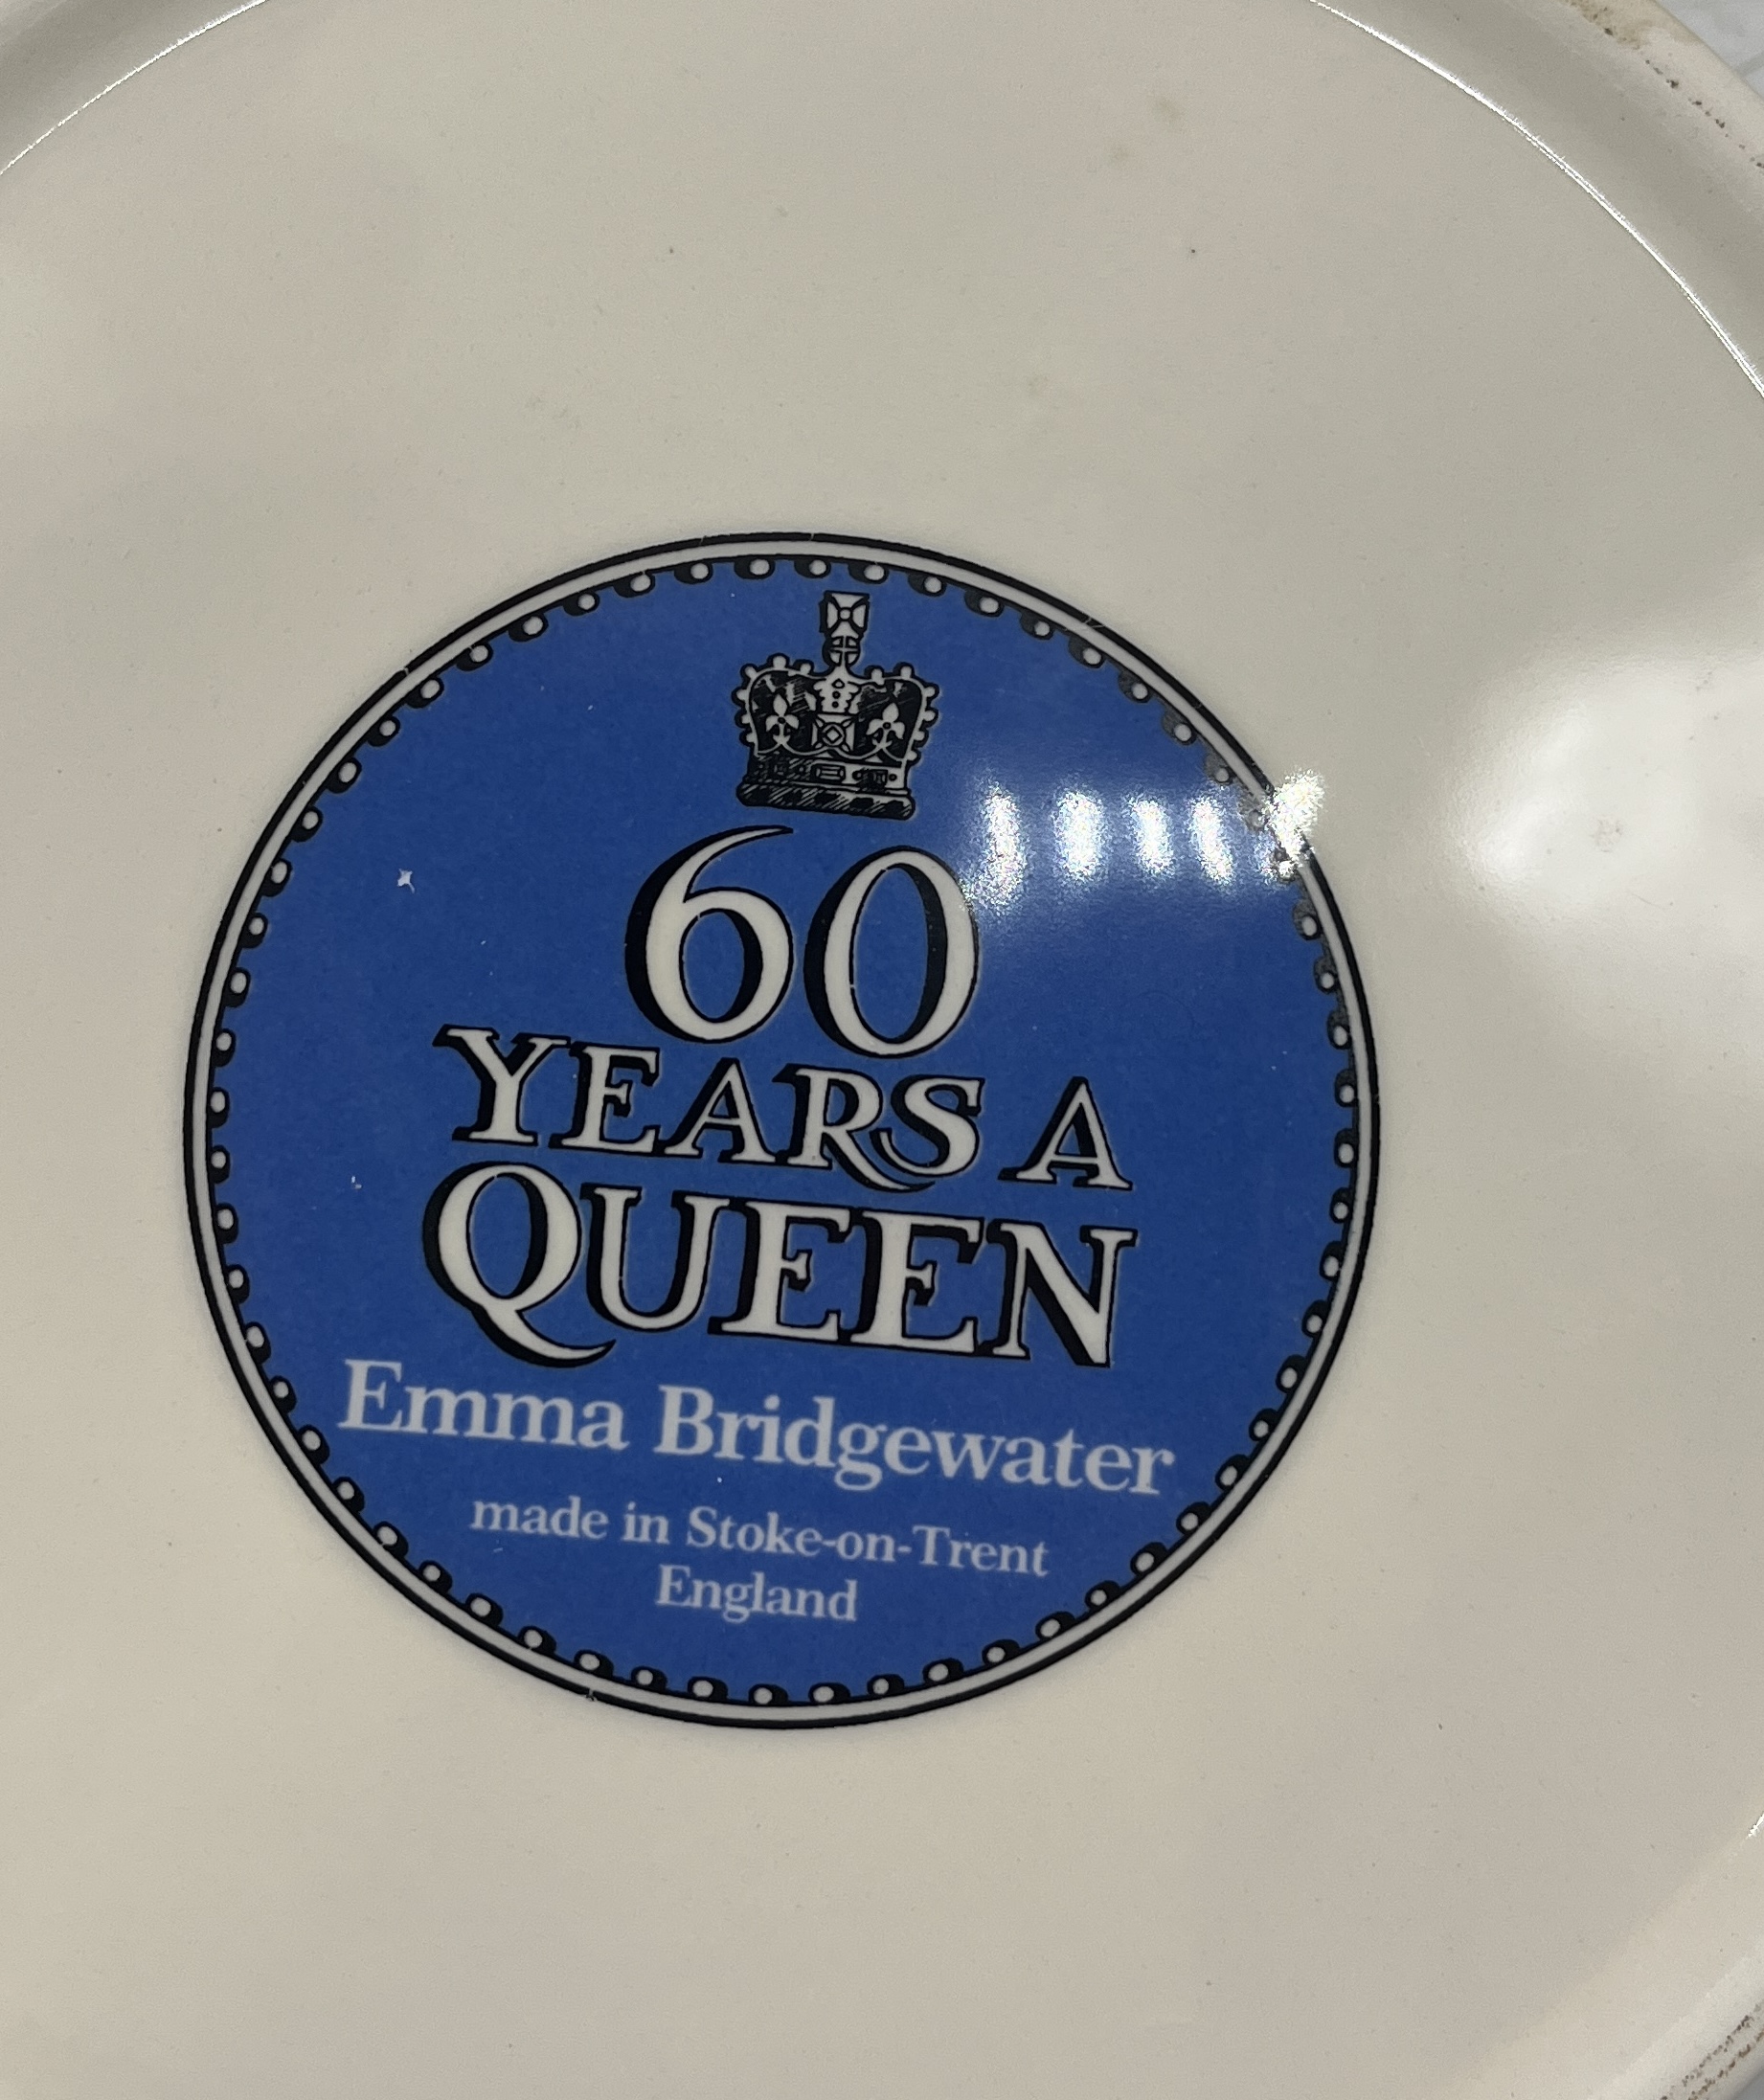 An Emma Bridgewater pottery jar and cover, modelled as a crown to commemorate Queen Elizabeth II's - Image 5 of 5